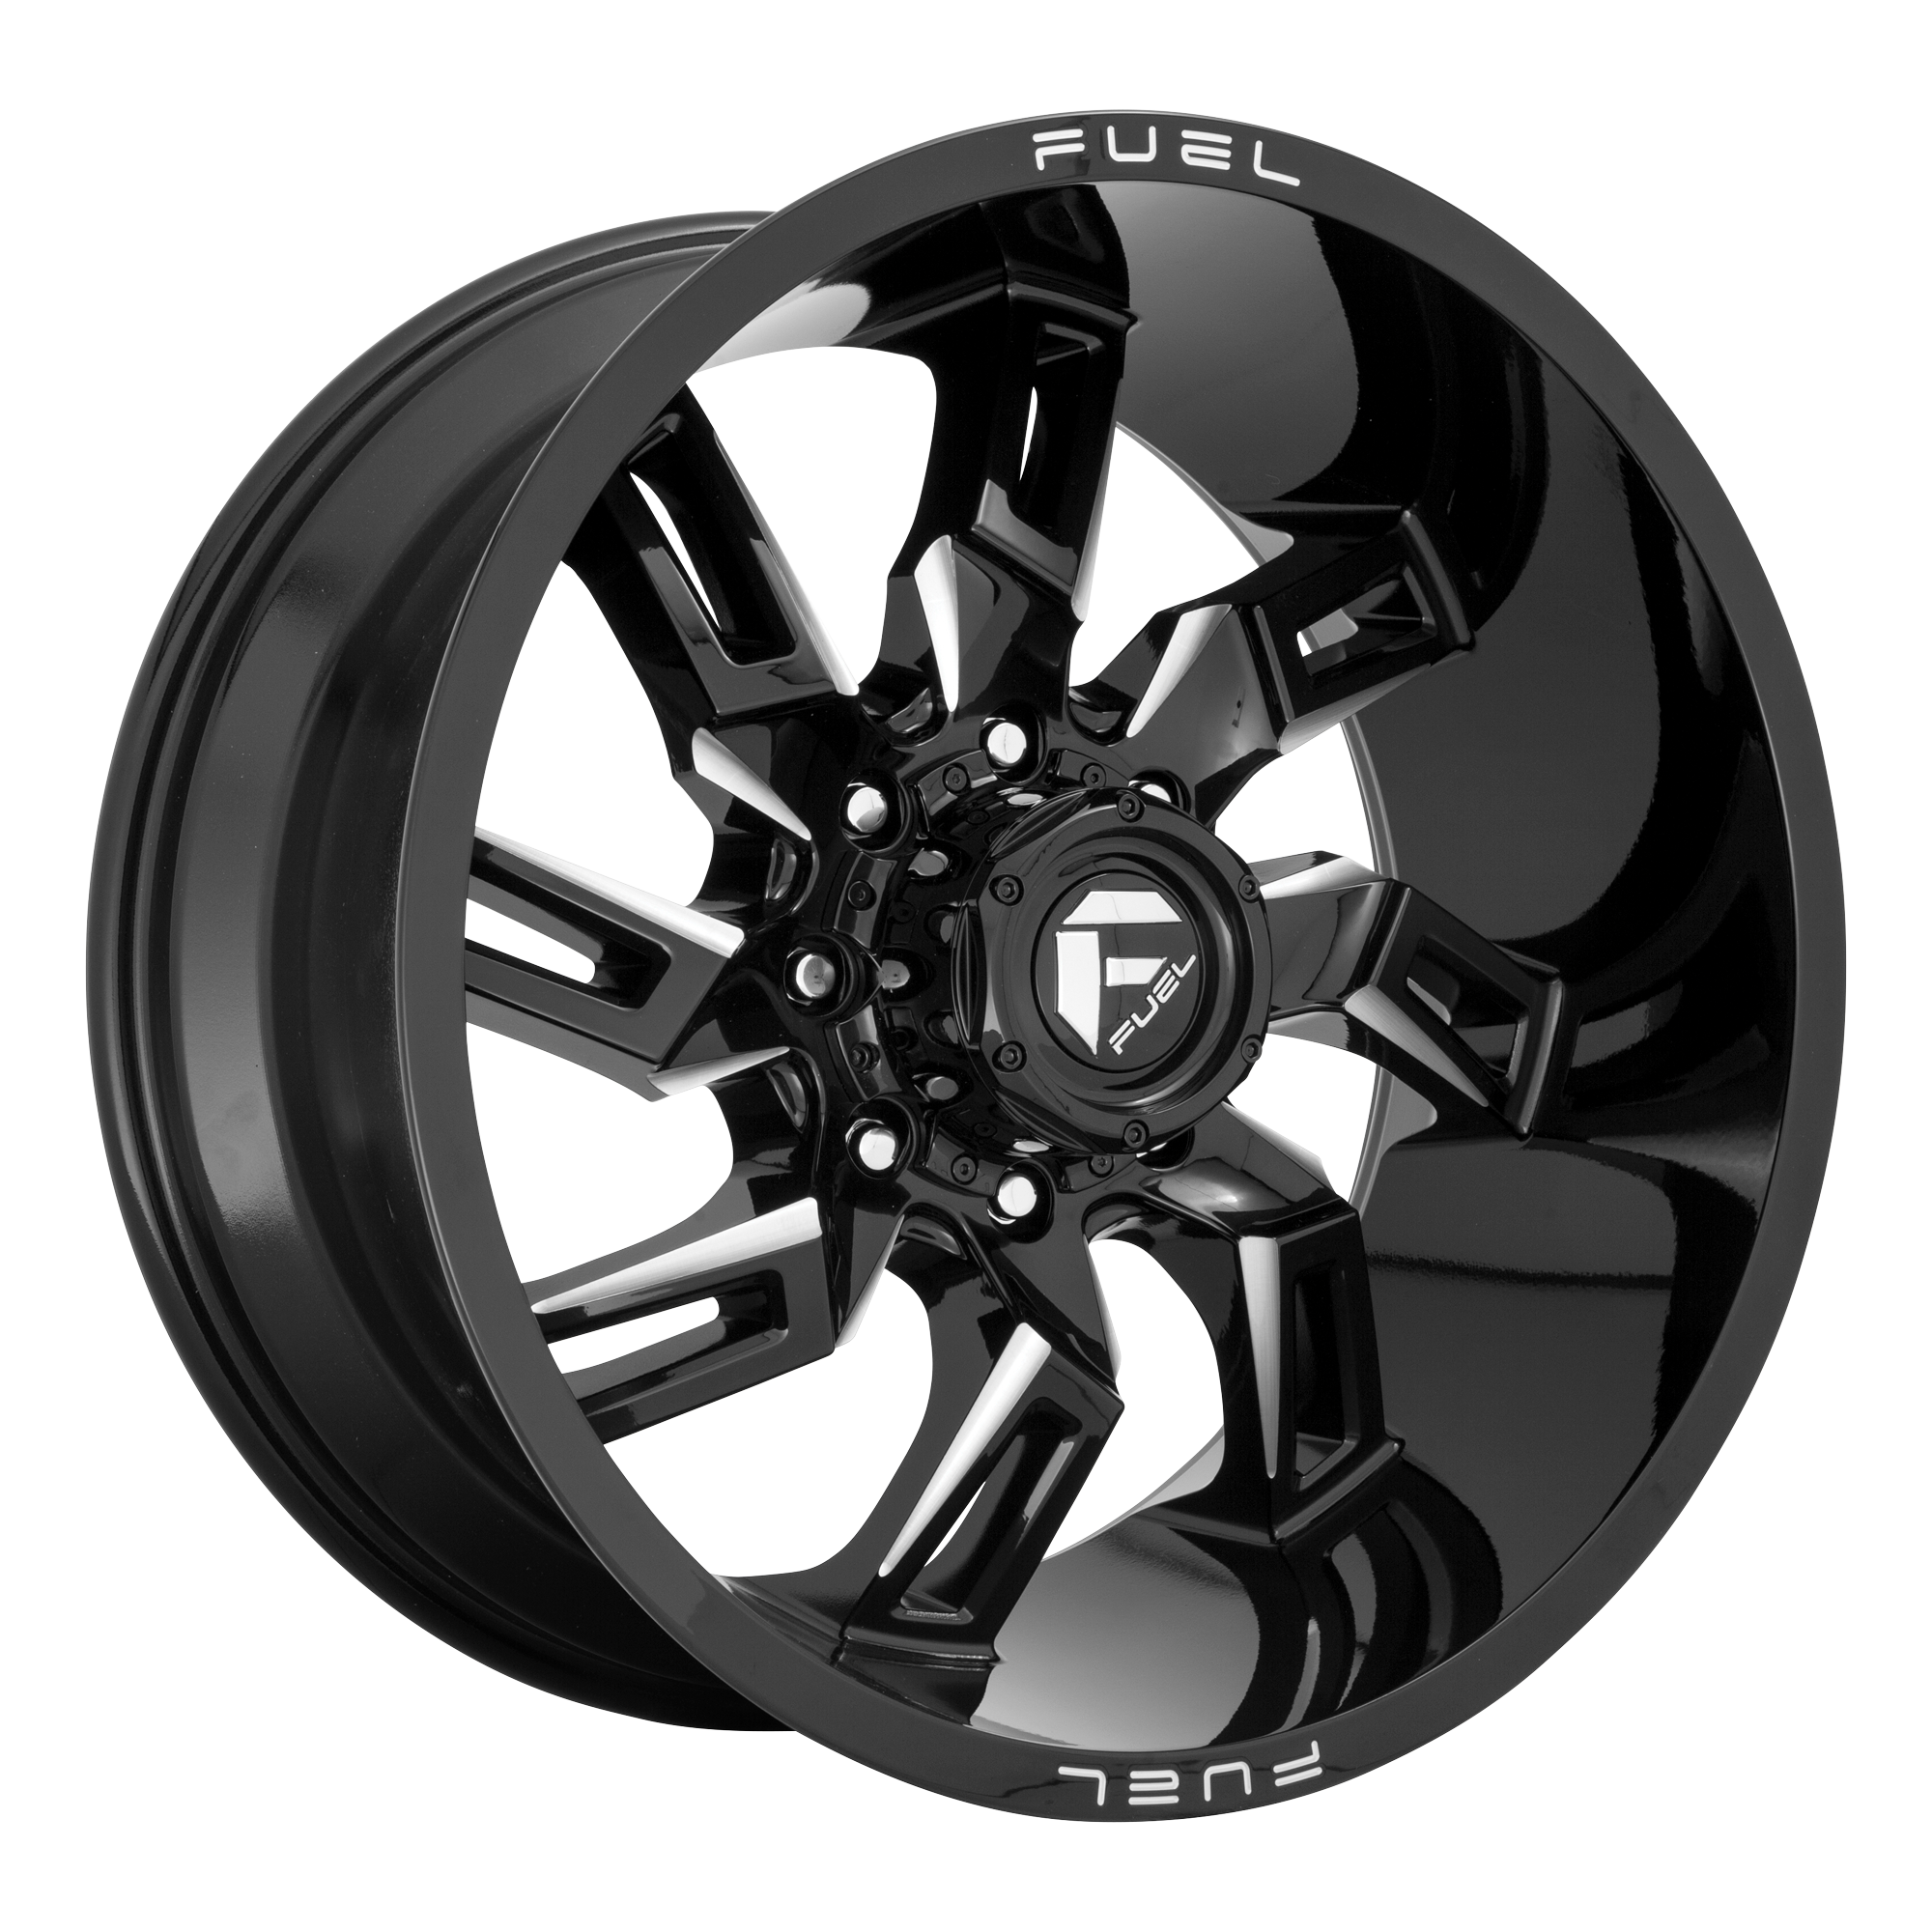 LOCKDOWN 20x9 6x135.00 GLOSS BLACK MILLED (1 mm) - Tires and Engine Performance